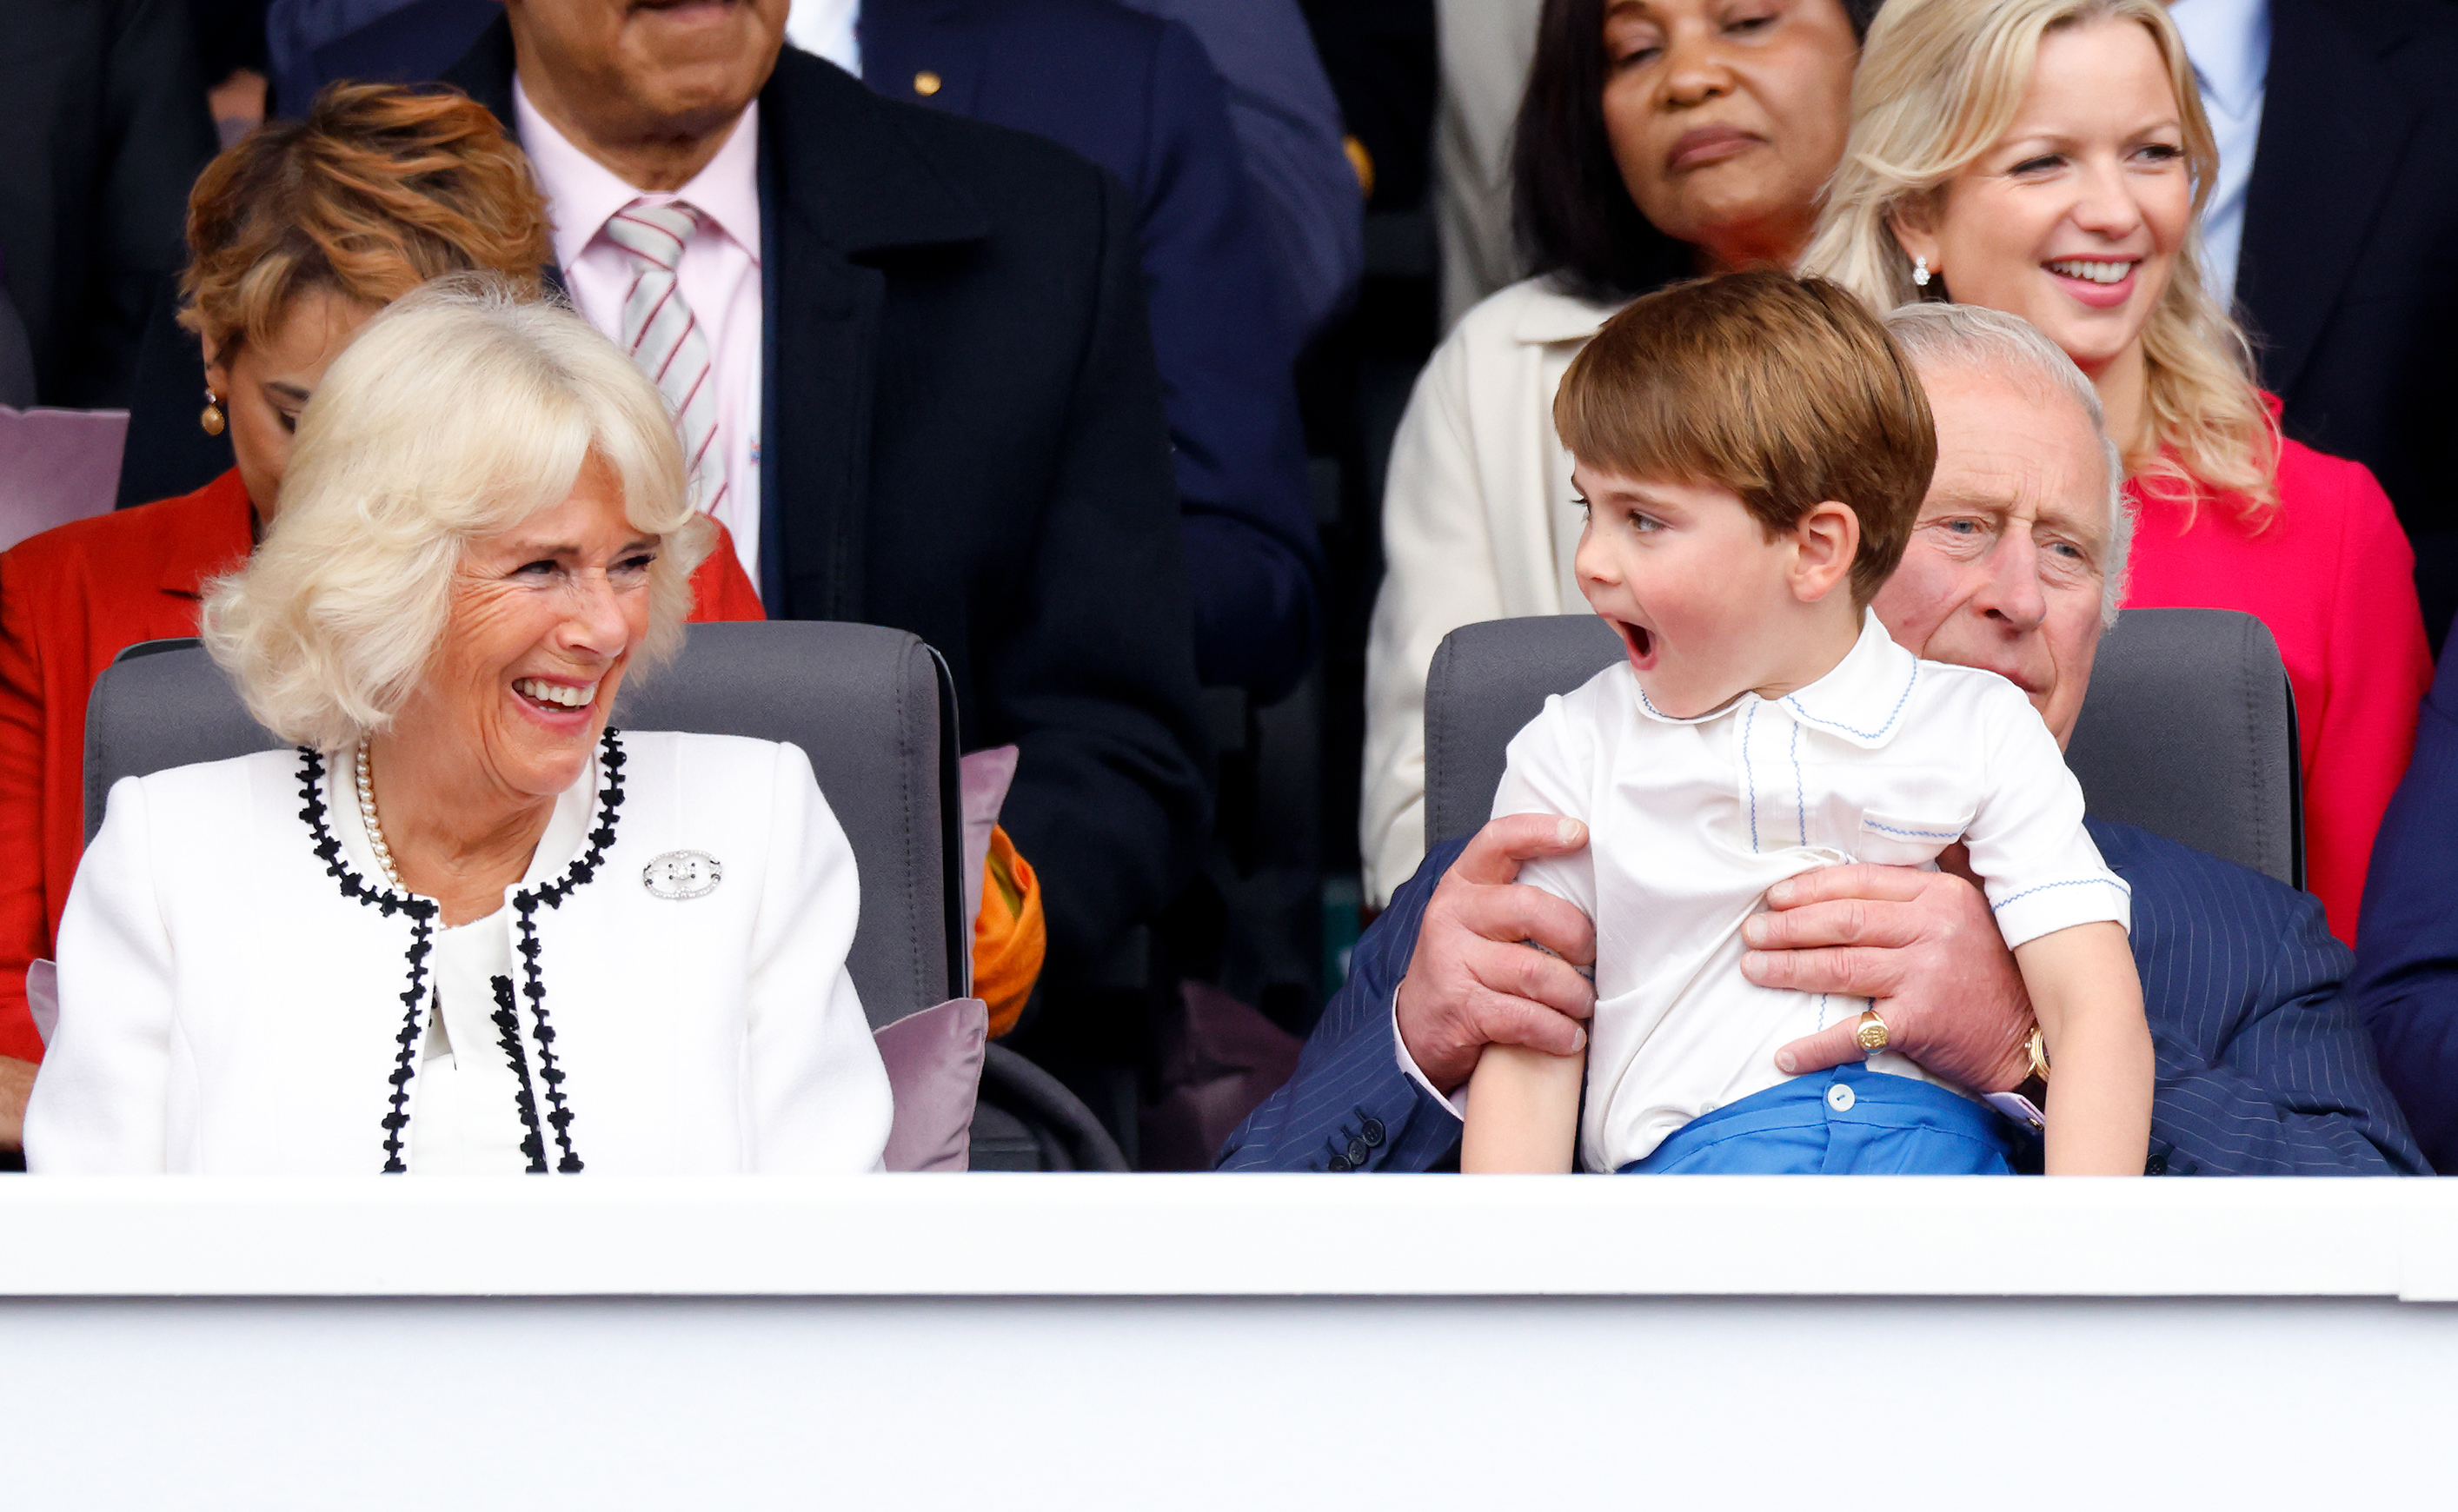 Camilla, Duchess of Cornwall, Prince Charles, Prince of Wales, and Prince Louis of Cambridge attend the Platinum Pageant in London, England, on June 5, 2022. | Source: Getty Images